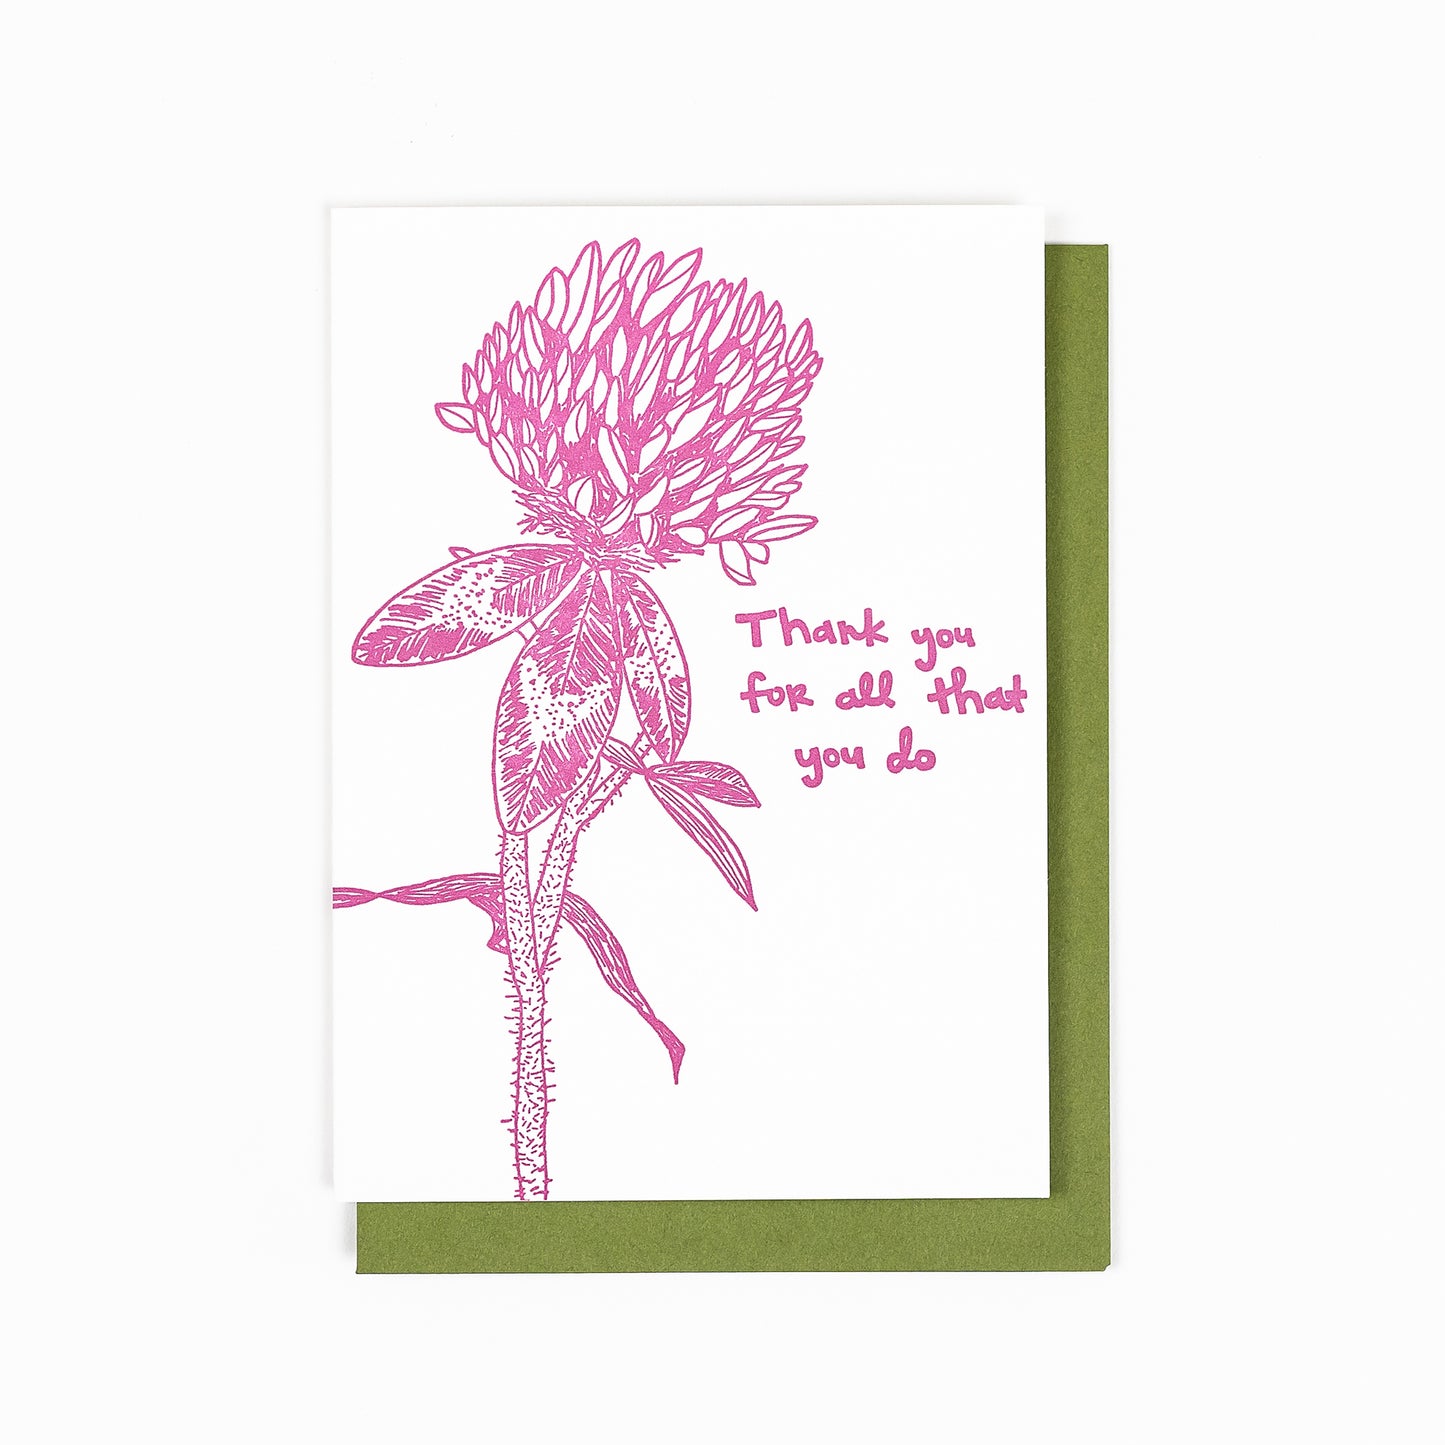 Letterpress greeting card featuring a hand-drawn red clover wildflower, printed in a rich pink ink. Whimsical hand-drawn text saying "Thank you for all that you do" is shown on the right side of the card, in the same pink ink. The white card is 100% cotton, blank inside, and is paired with an earthy green envelope.